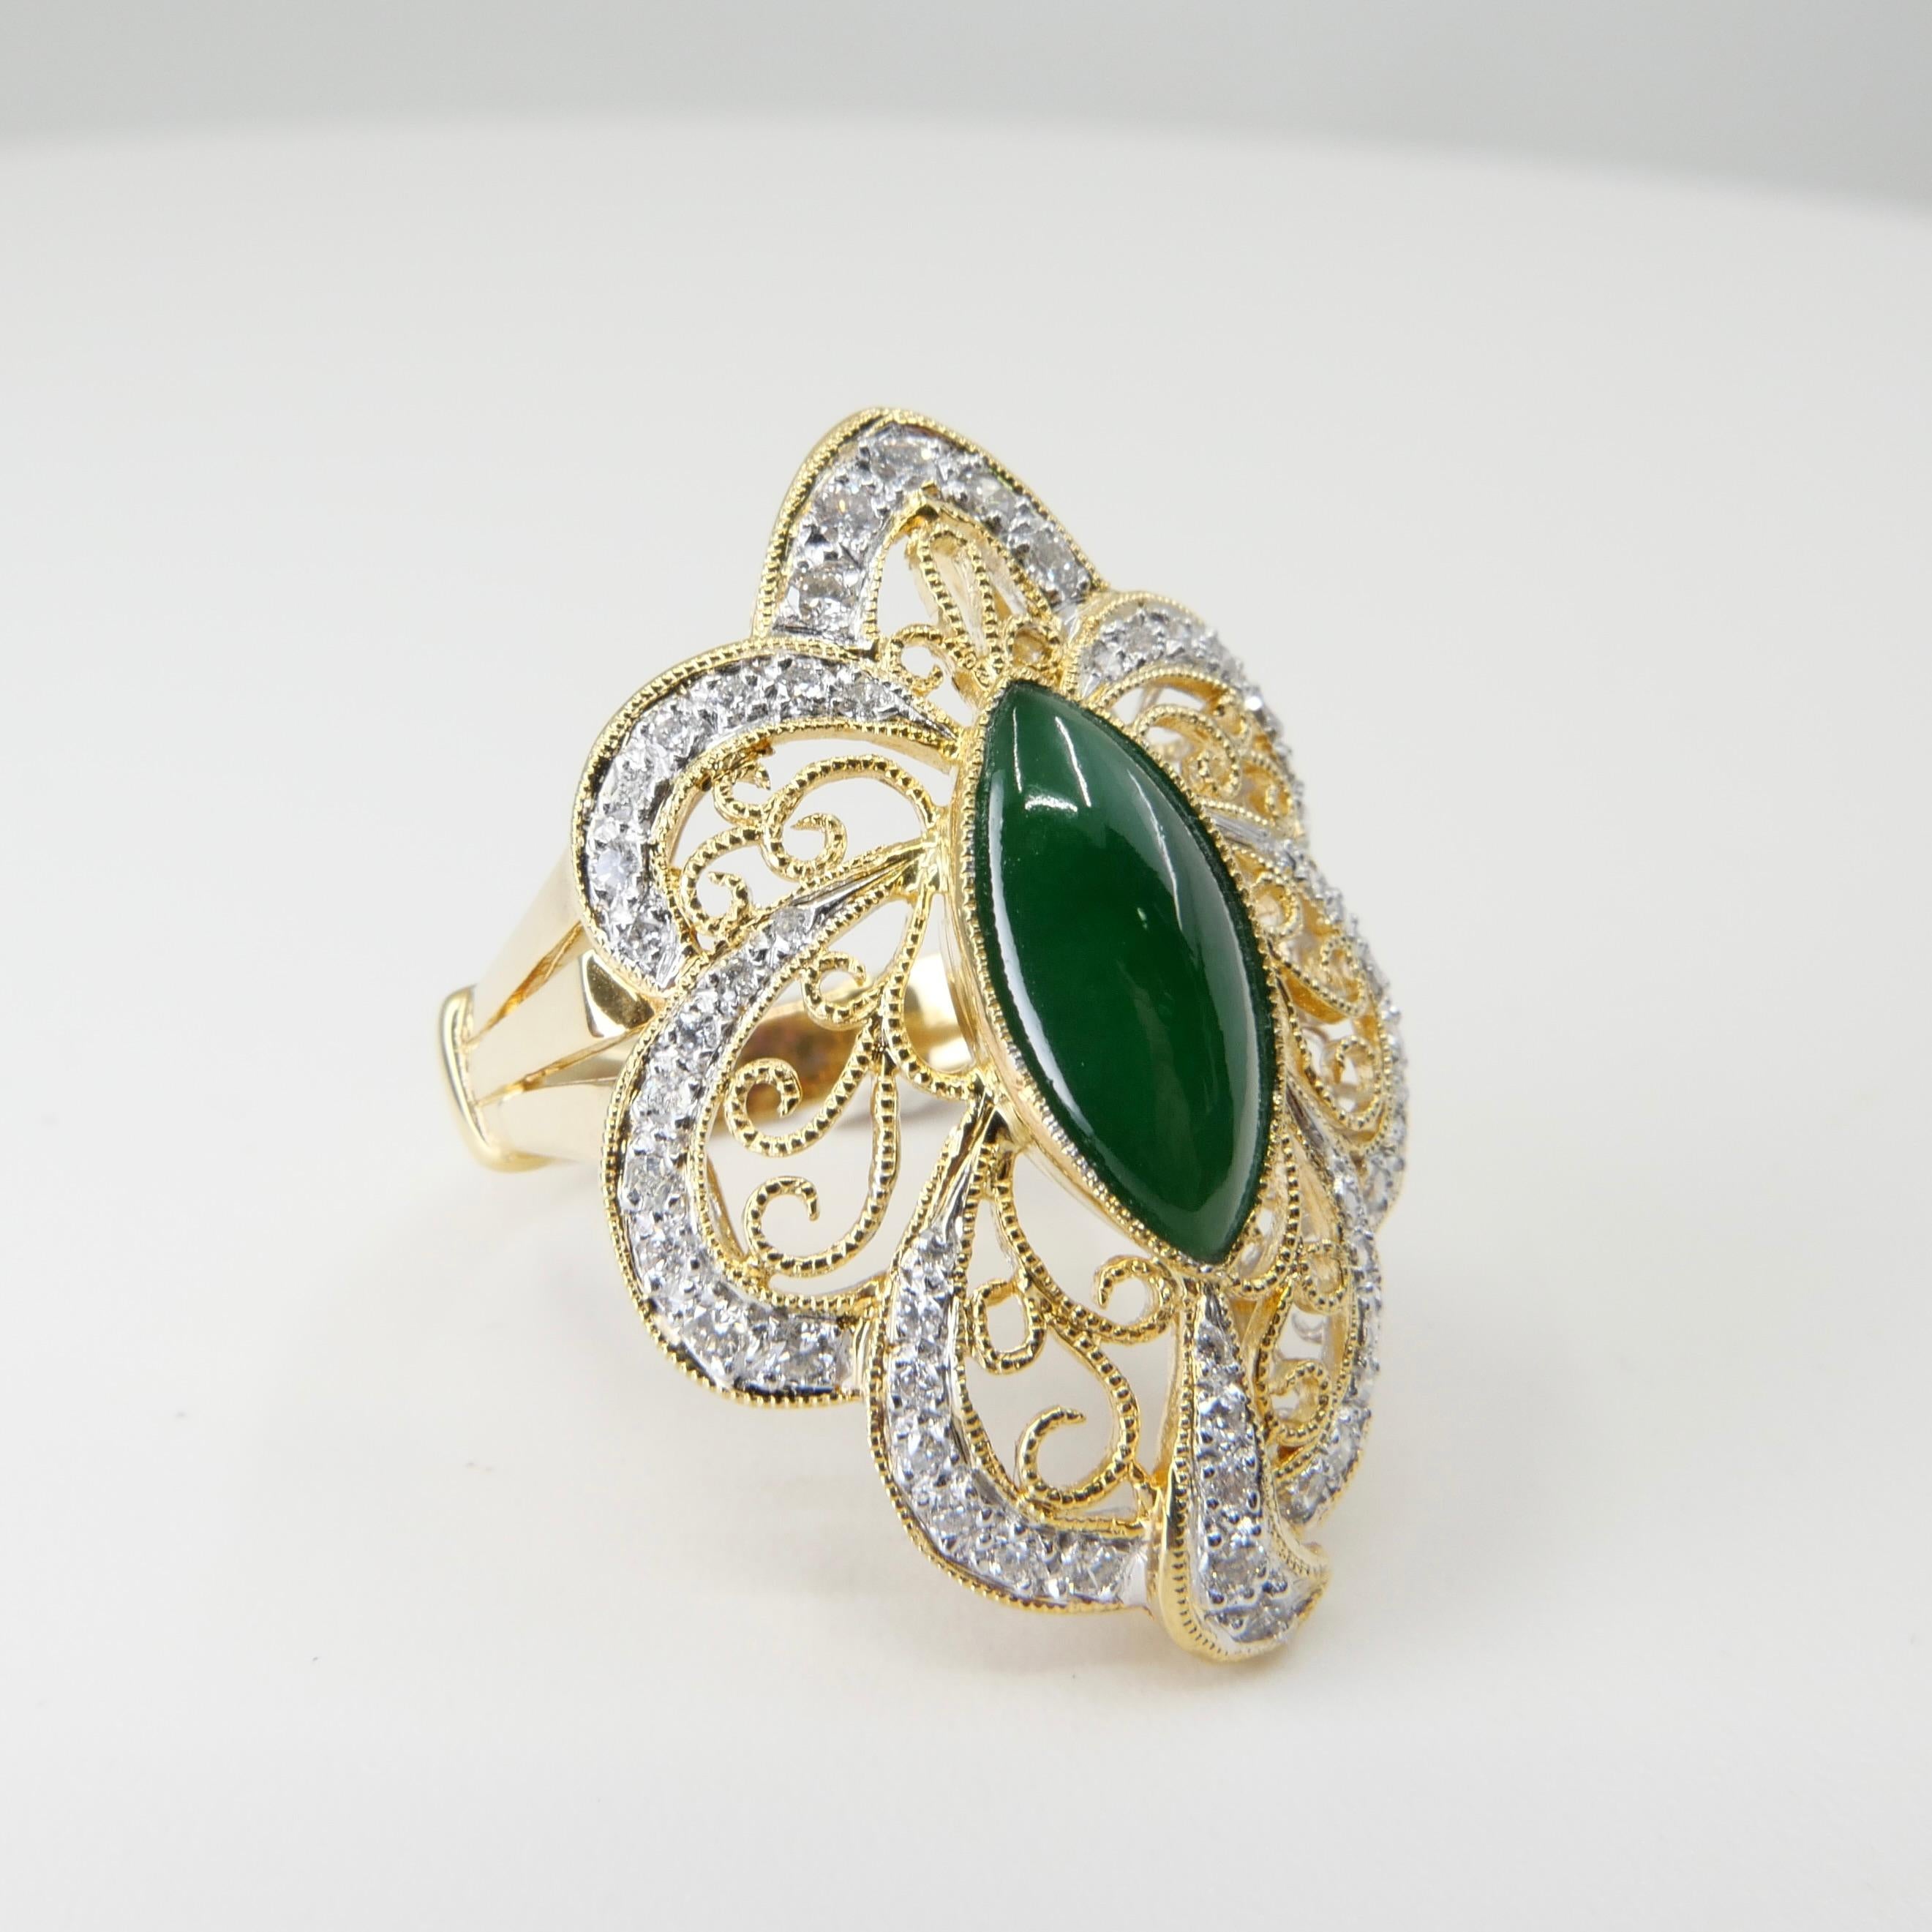 Certified Jadeite Jade & Diamond Cocktail Ring, Intense Apple Green Color For Sale 2